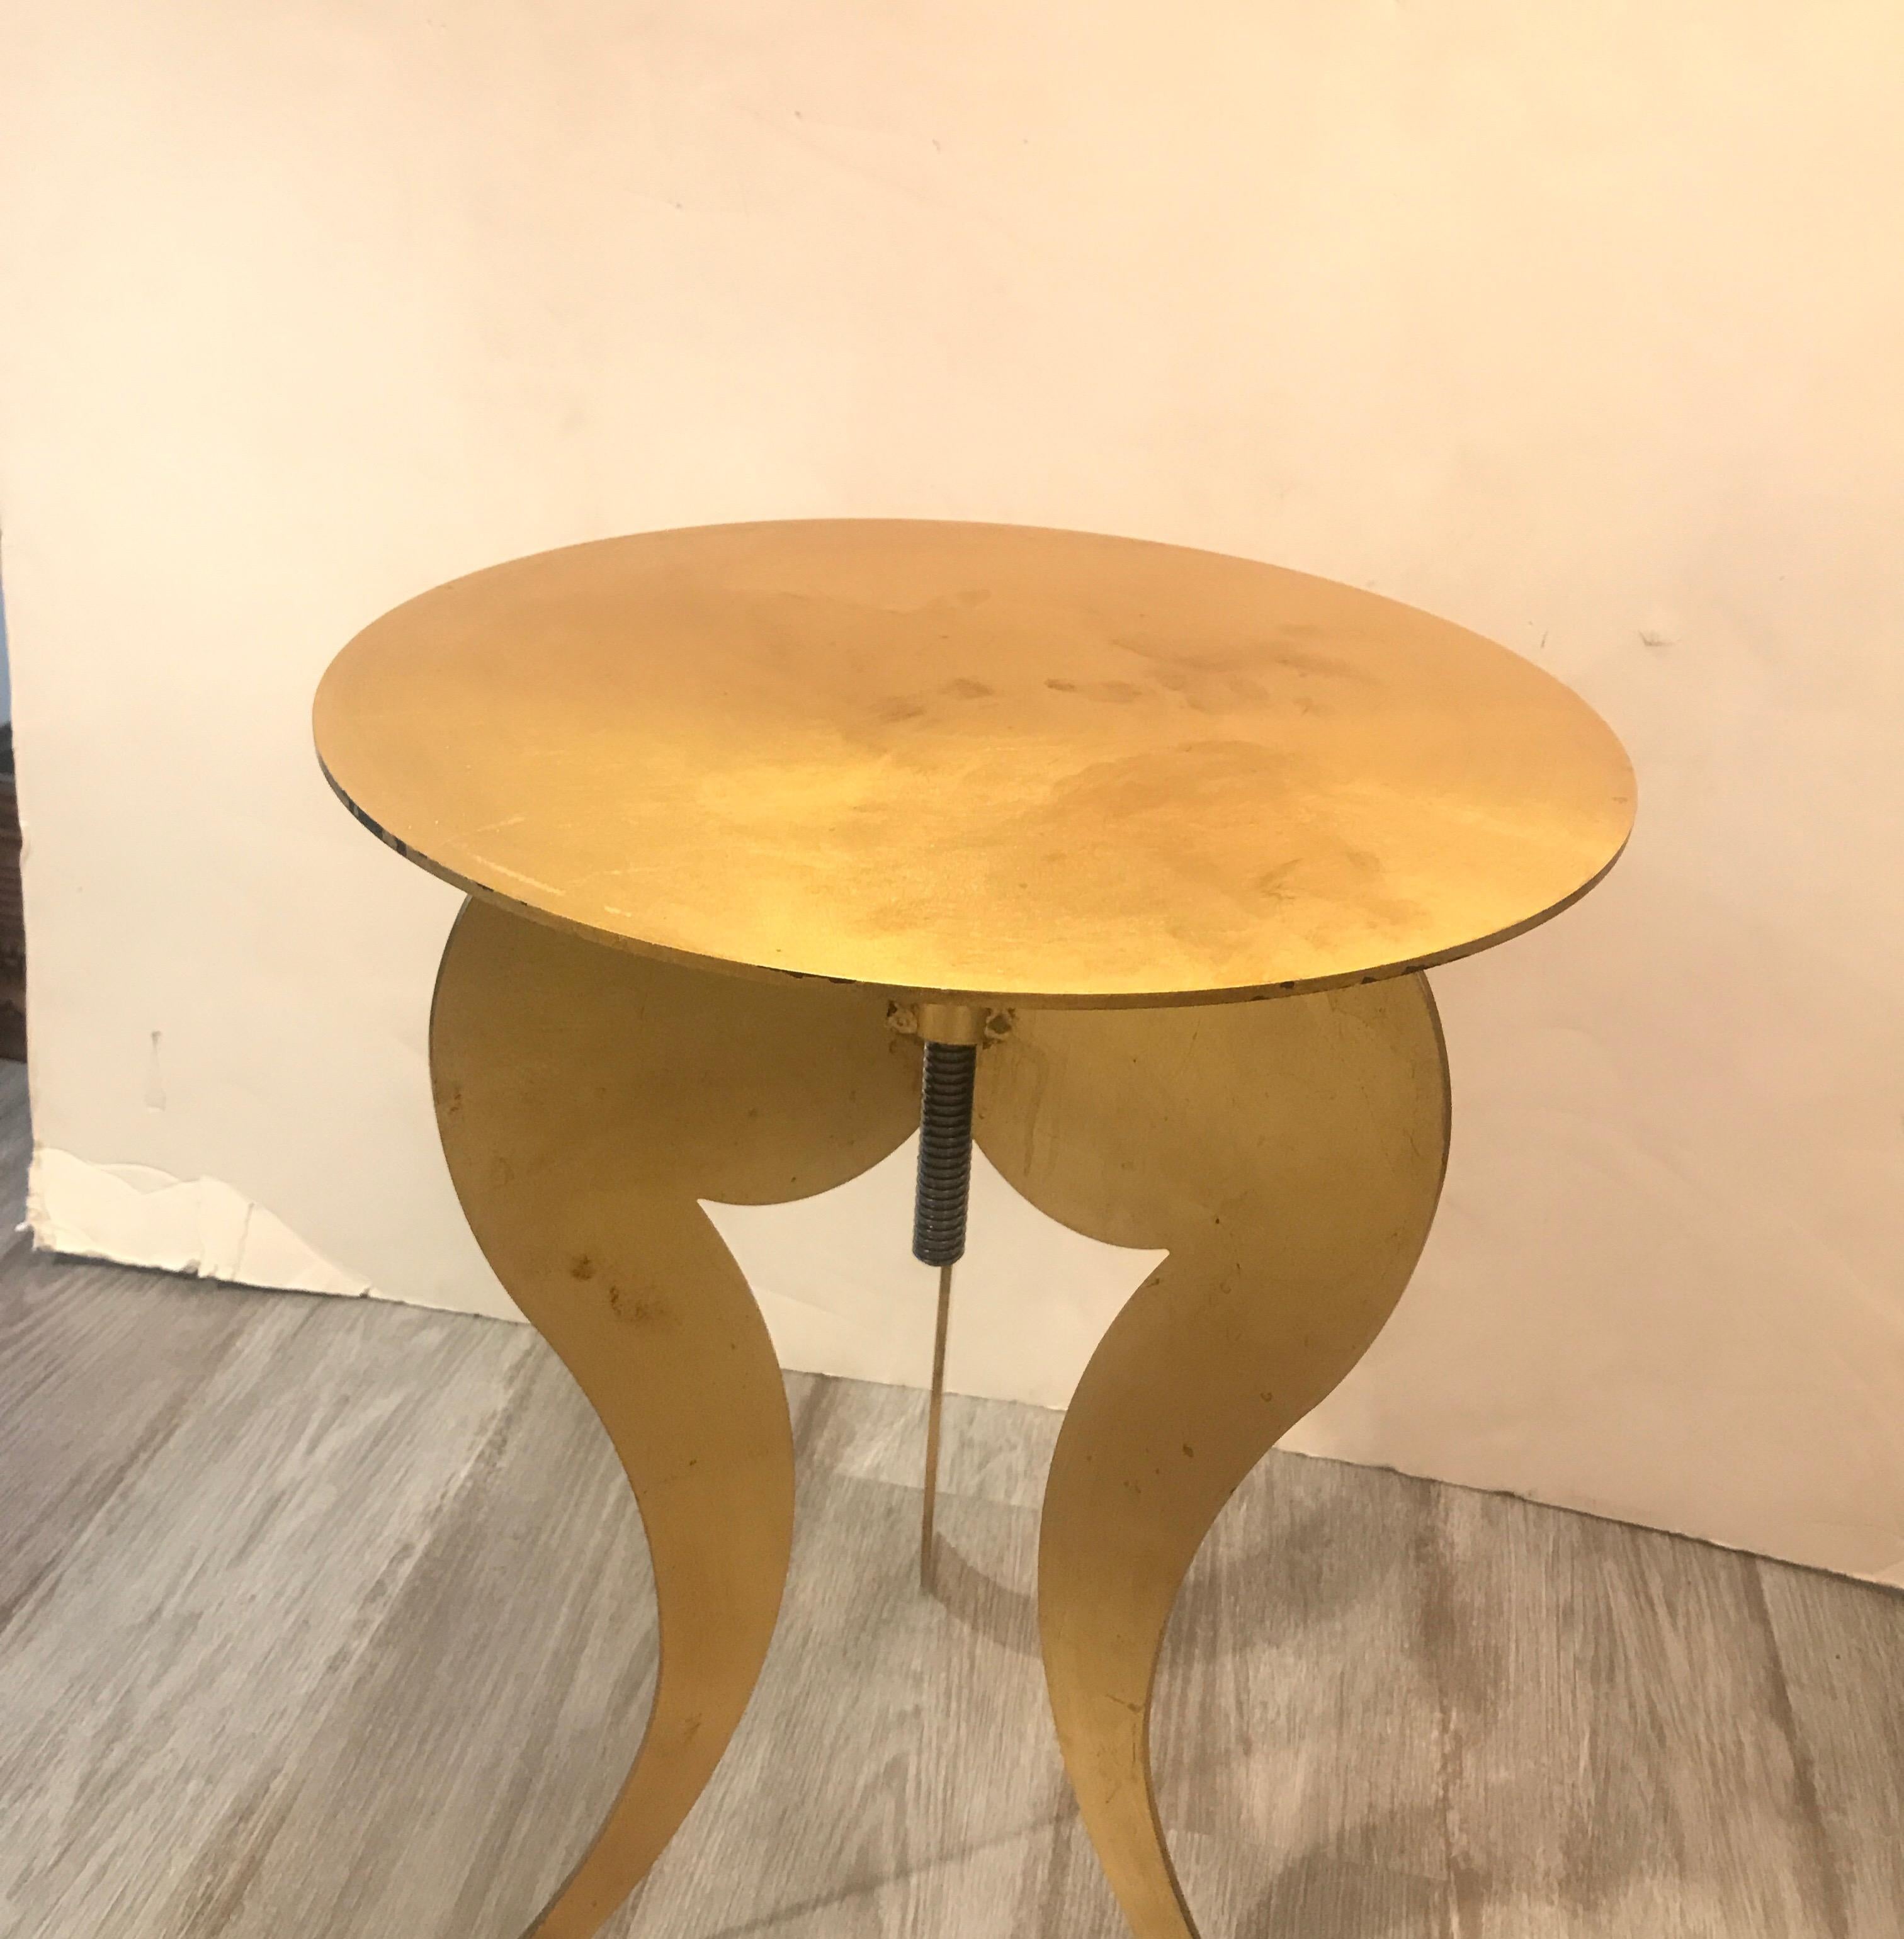 Pair of Gilt Steel Adjustable Round Pedestal Tables attributed to Sergio Terzani 1